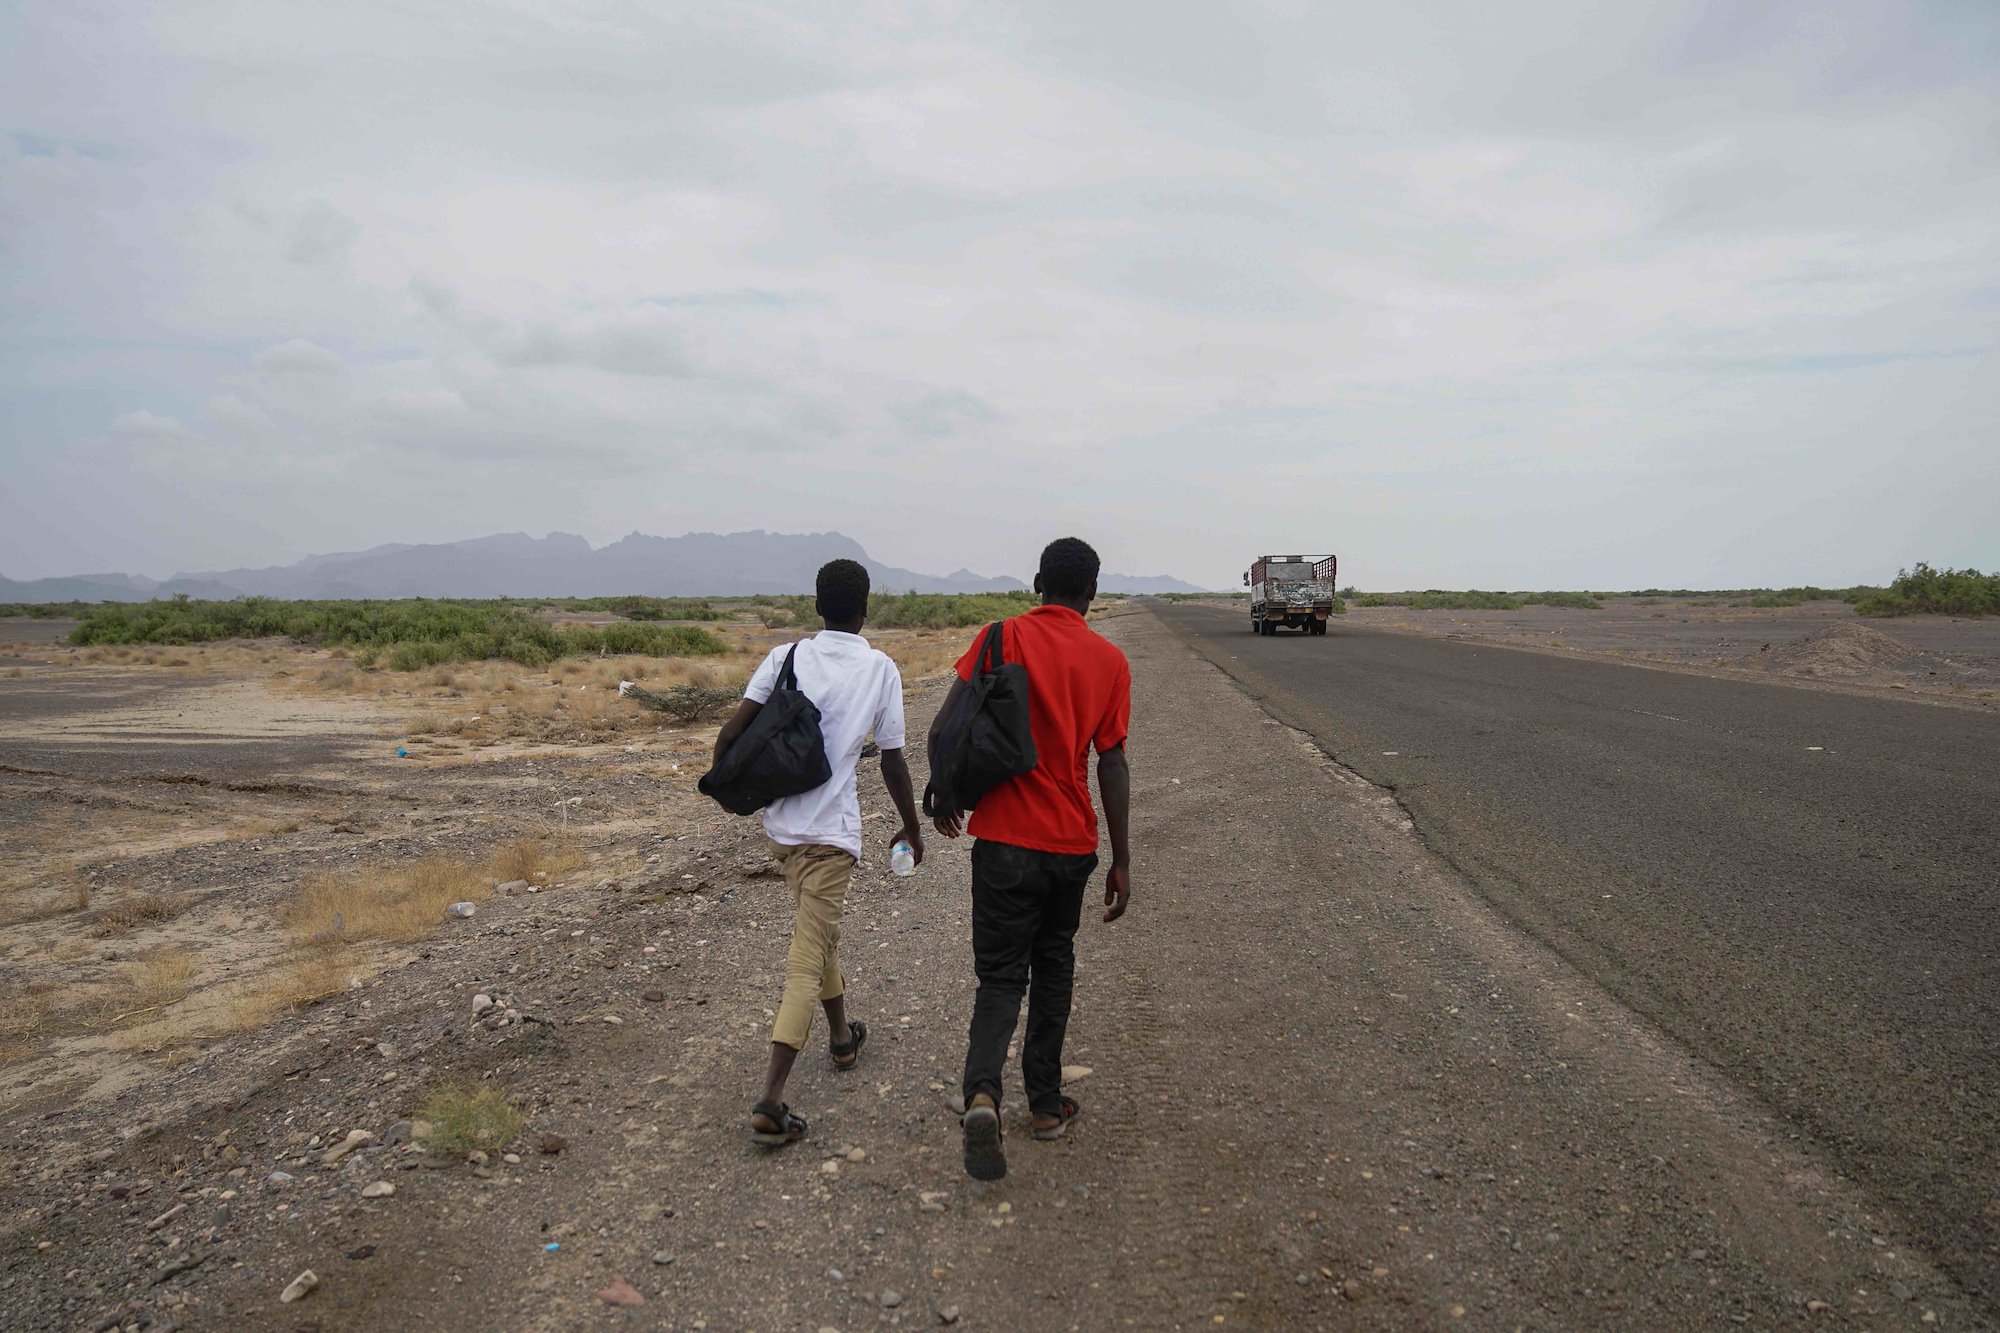 Two Ethiopian men, aged 15 and 17, walk the long road towards Aden from Ras-al-Ara, some 150 km to the east. They arrived a week earlier from Djibouti by smuggler boat.